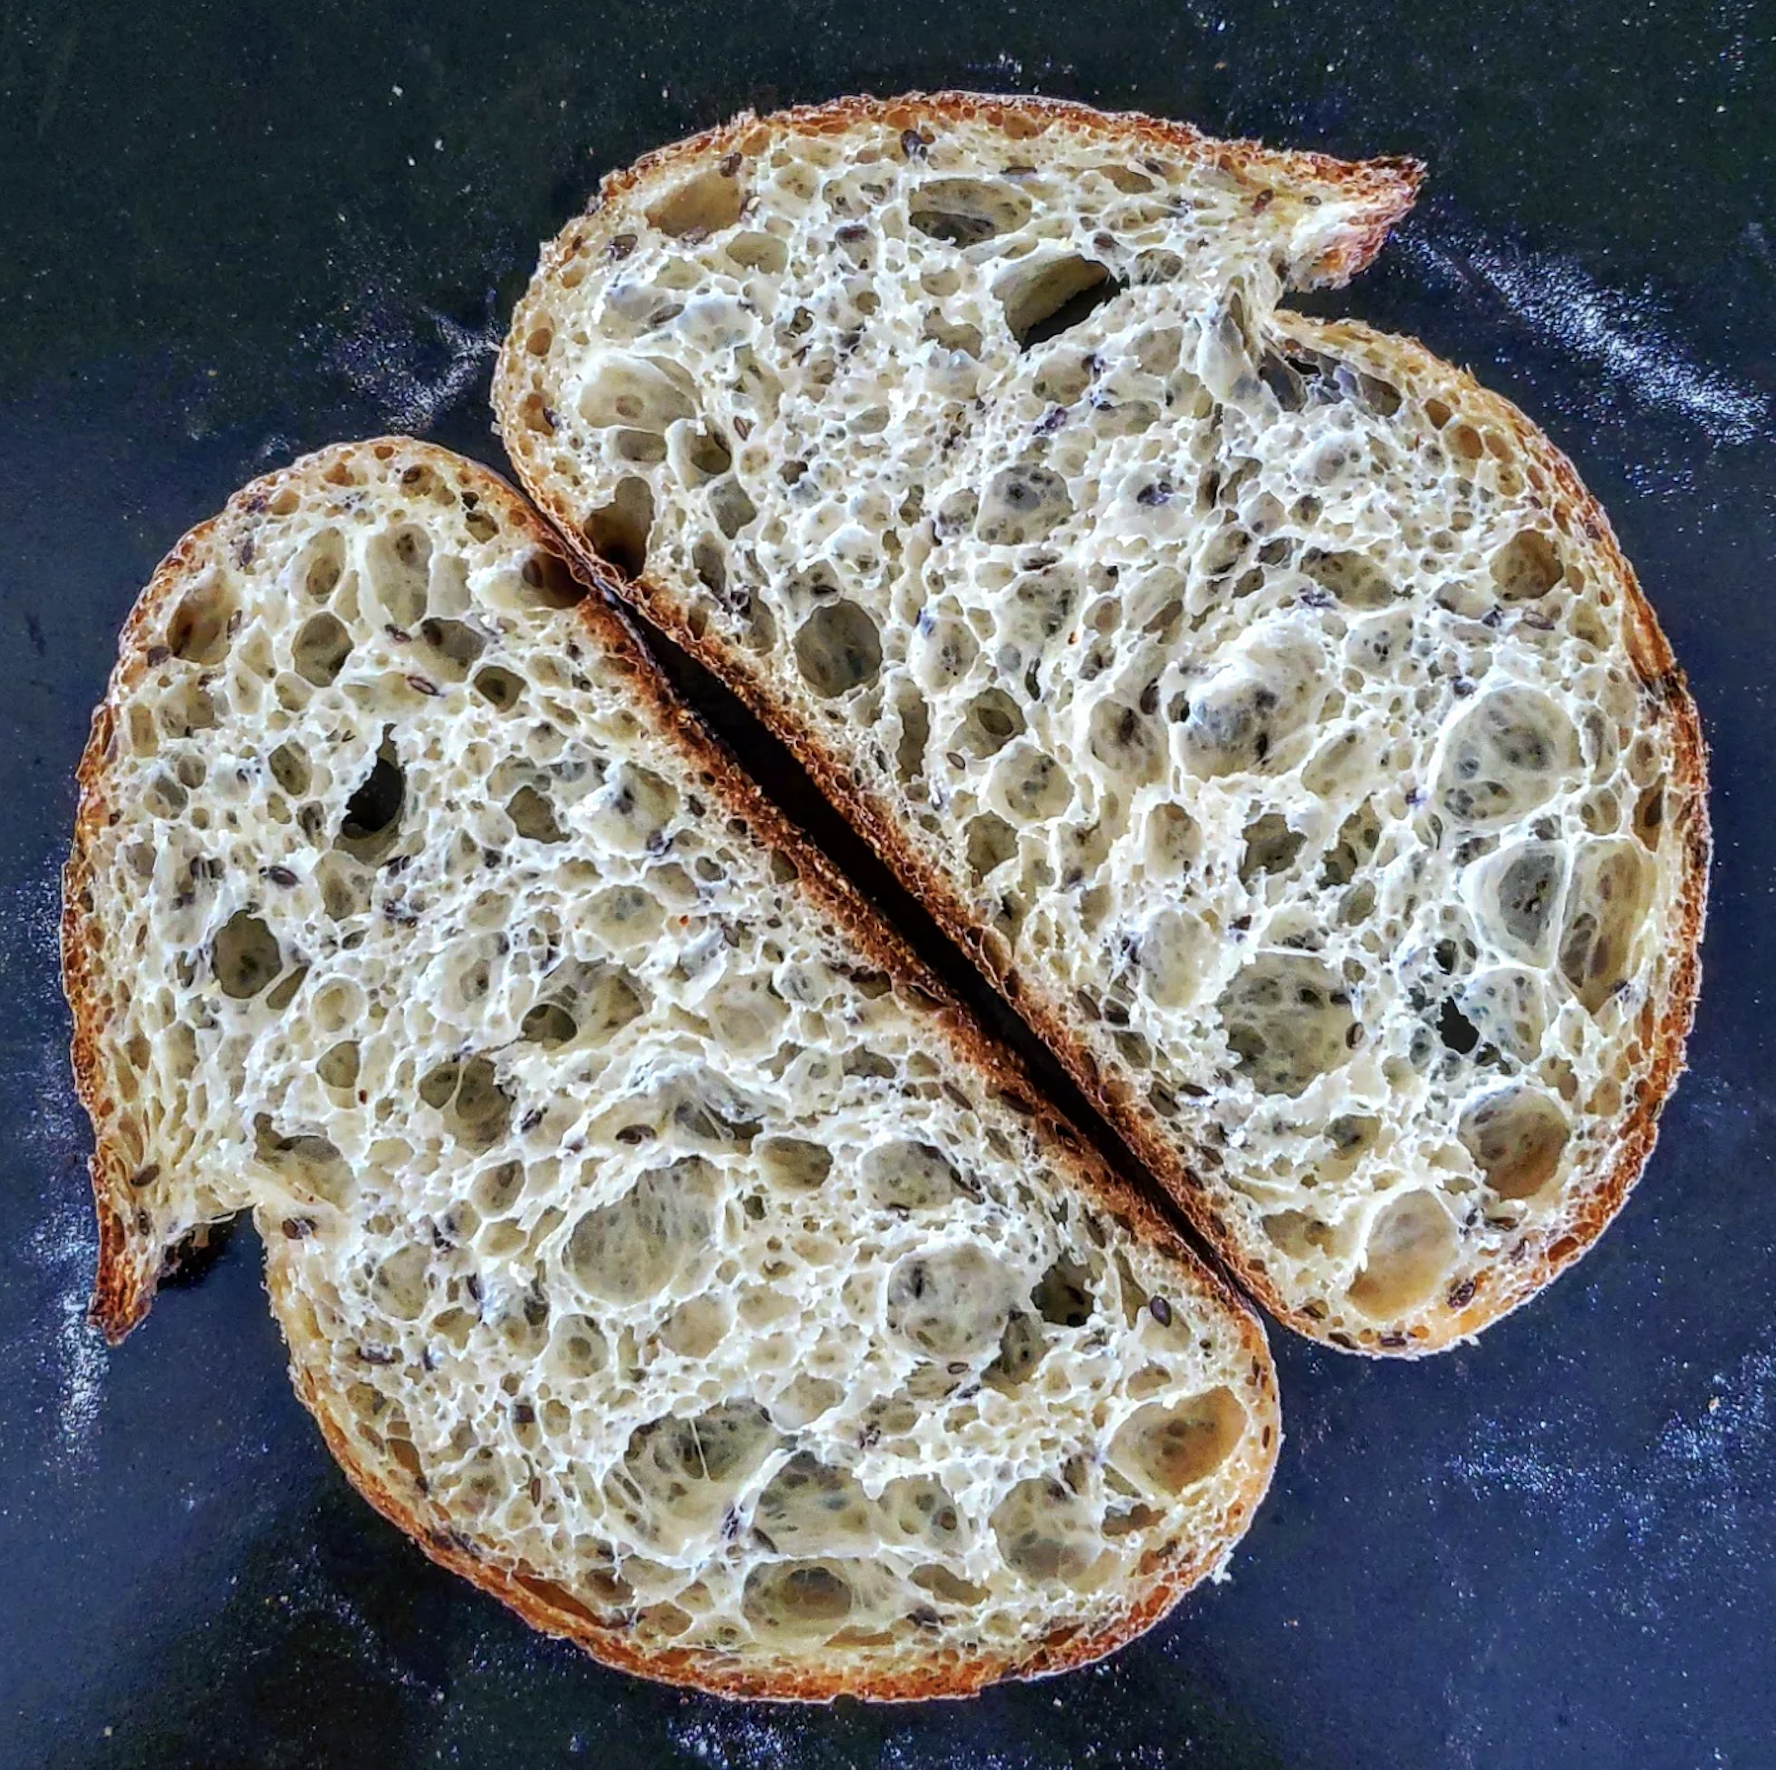 sourdough bread influencer at home baker social media instagram video content creator Judy from @OhForTheLoaf in San Francisco California United States 112384